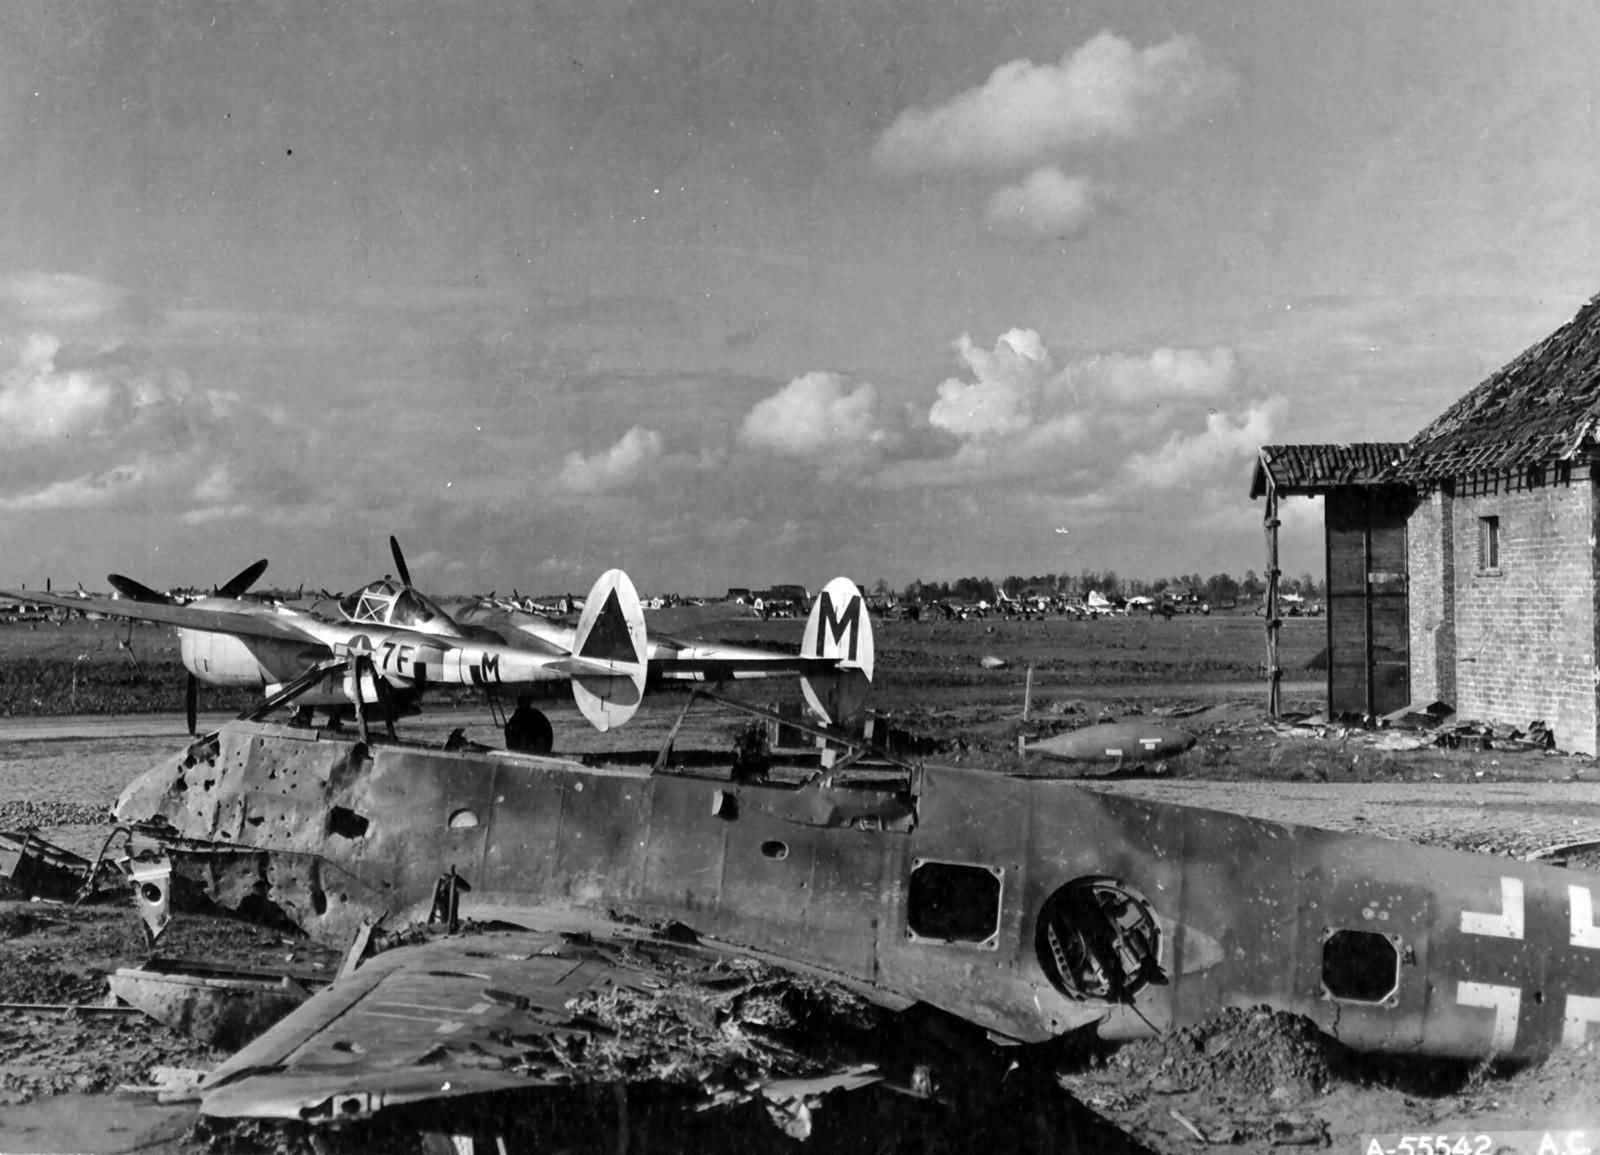 P-38J Lightning aircraft of 370th Fighter Group, US 485th Fighter Squadron at the former Luftwaffe night fighter base at Florennes, Belgium, Oct-Dec 1944; note wrecked Me 210 aircraft in foreground